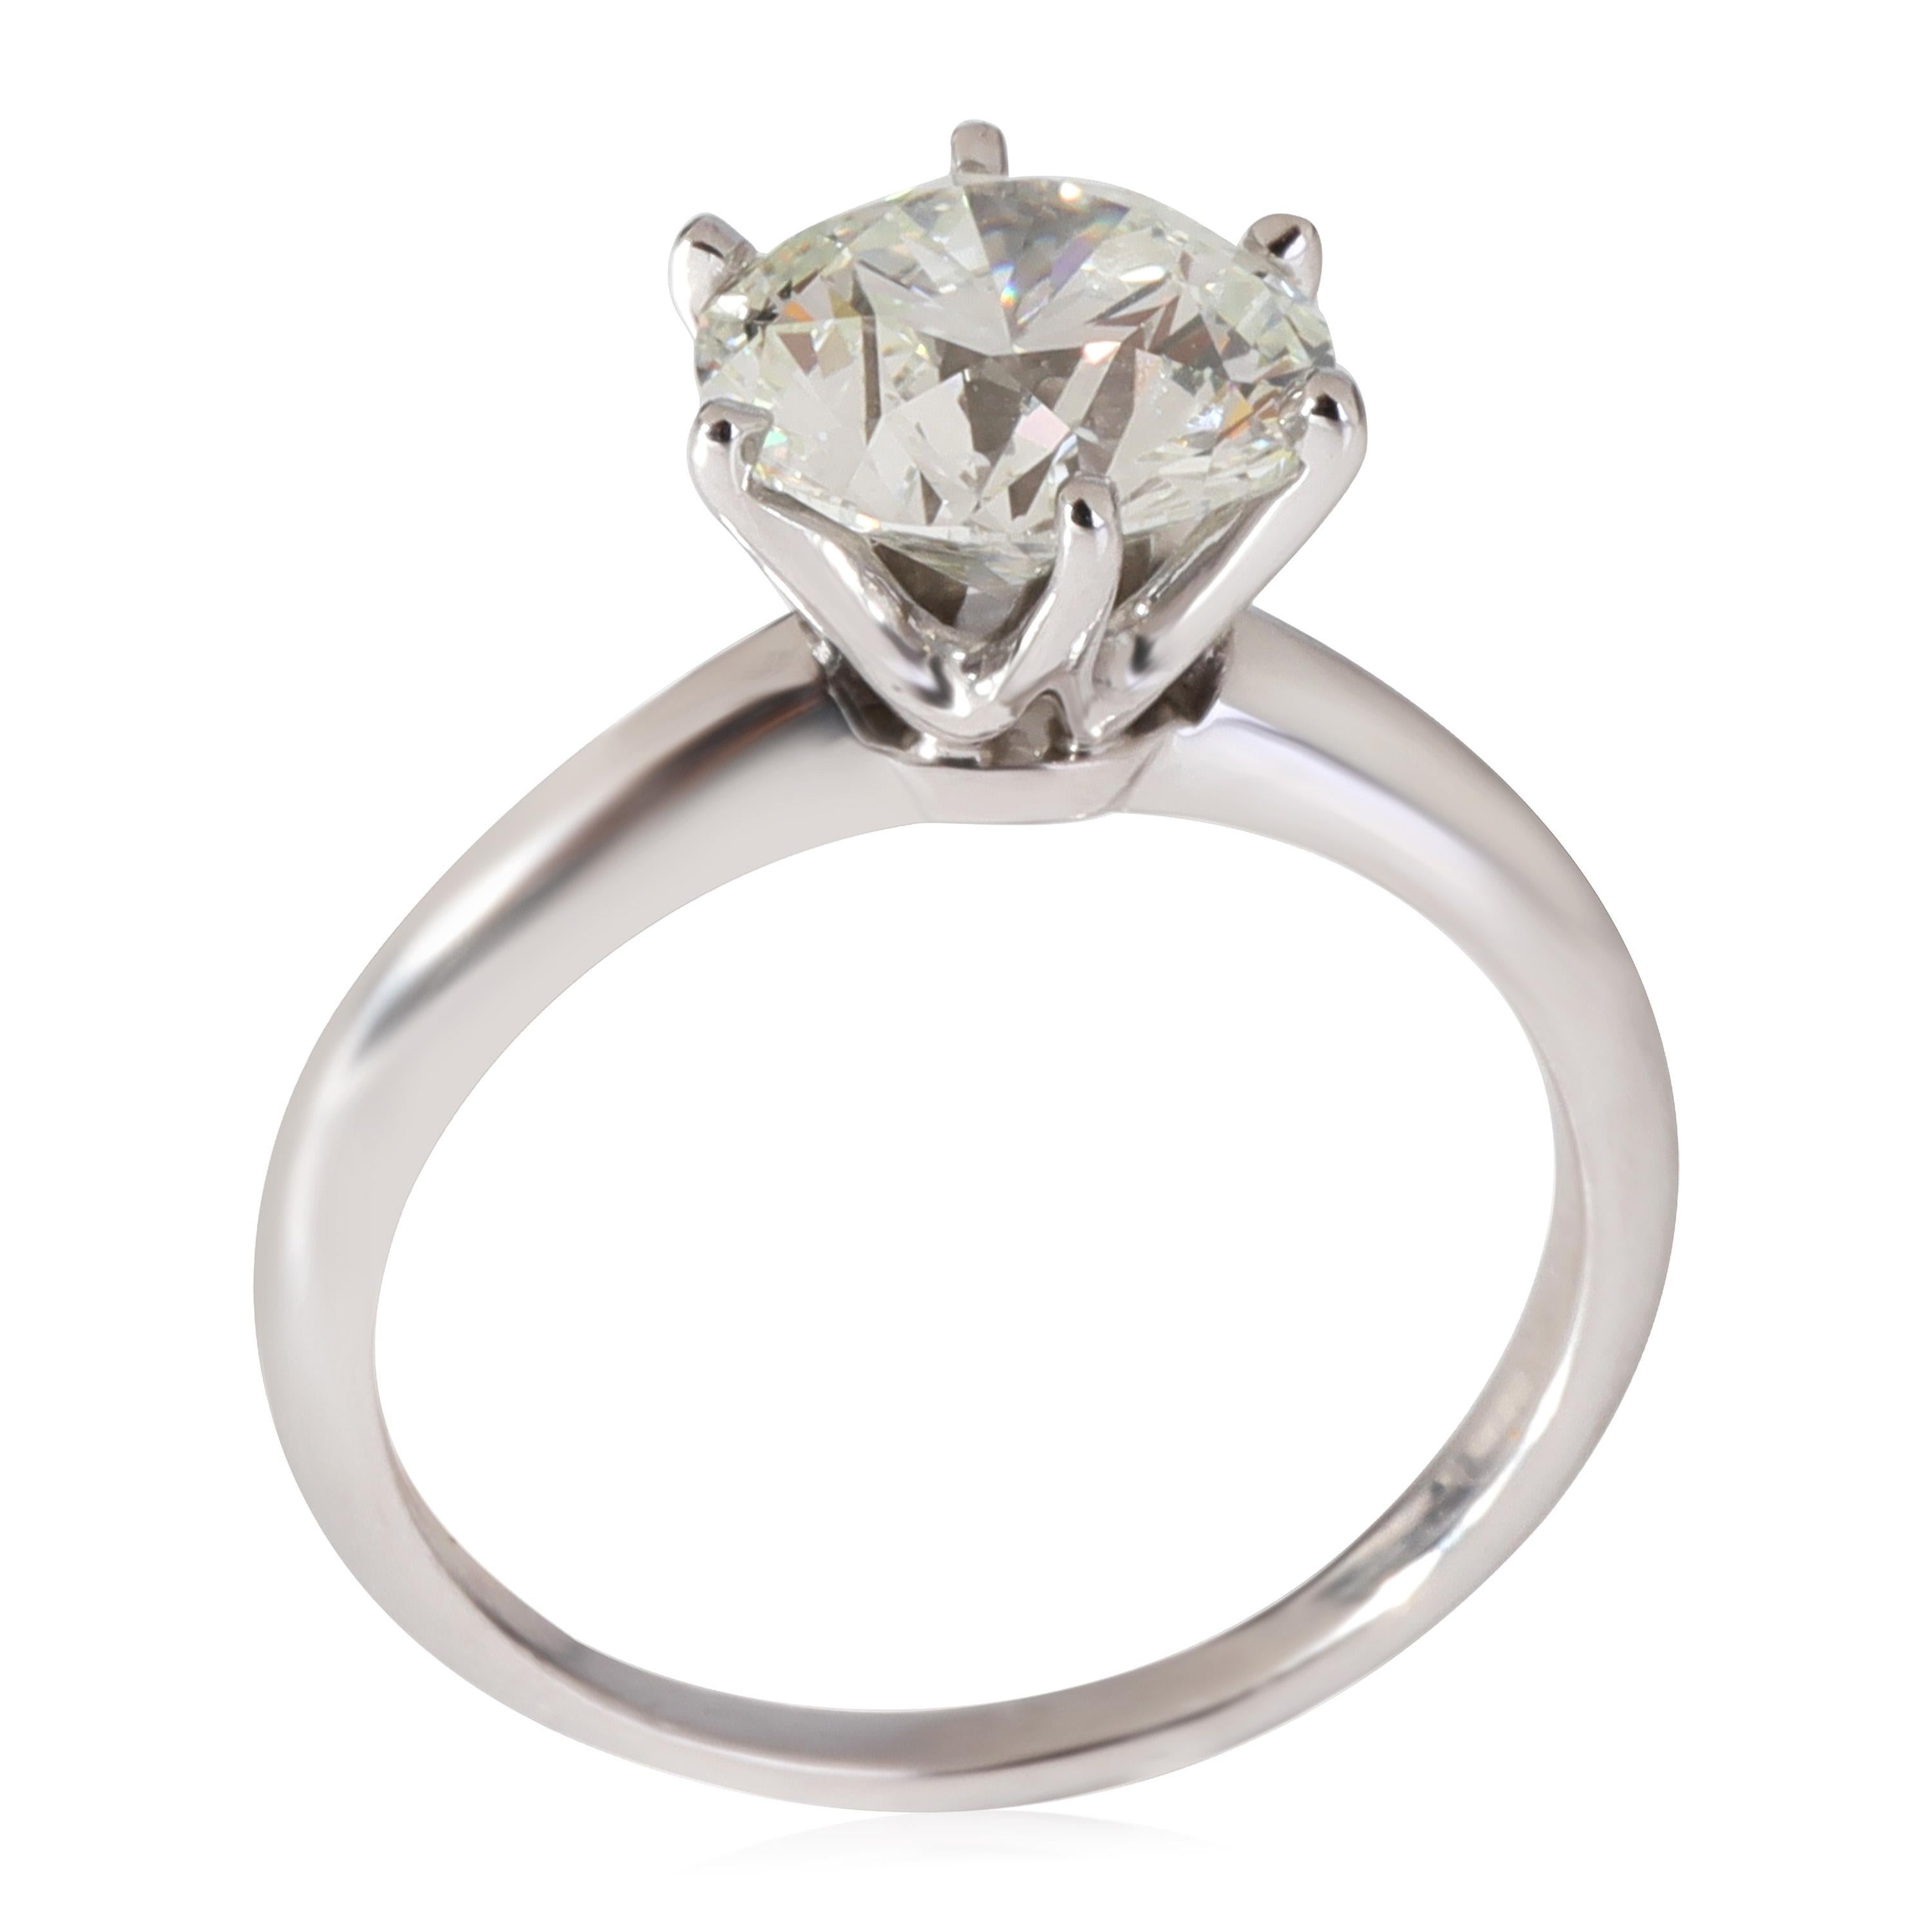 Tiffany & Co. Diamond Engagement Ring in Platinum I VS1 2.17 CTW

PRIMARY DETAILS
SKU: 119441
Listing Title: Tiffany & Co. Diamond Engagement Ring in Platinum I VS1 2.17 CTW
Condition Description: Retails for 49,500 USD. In excellent condition and